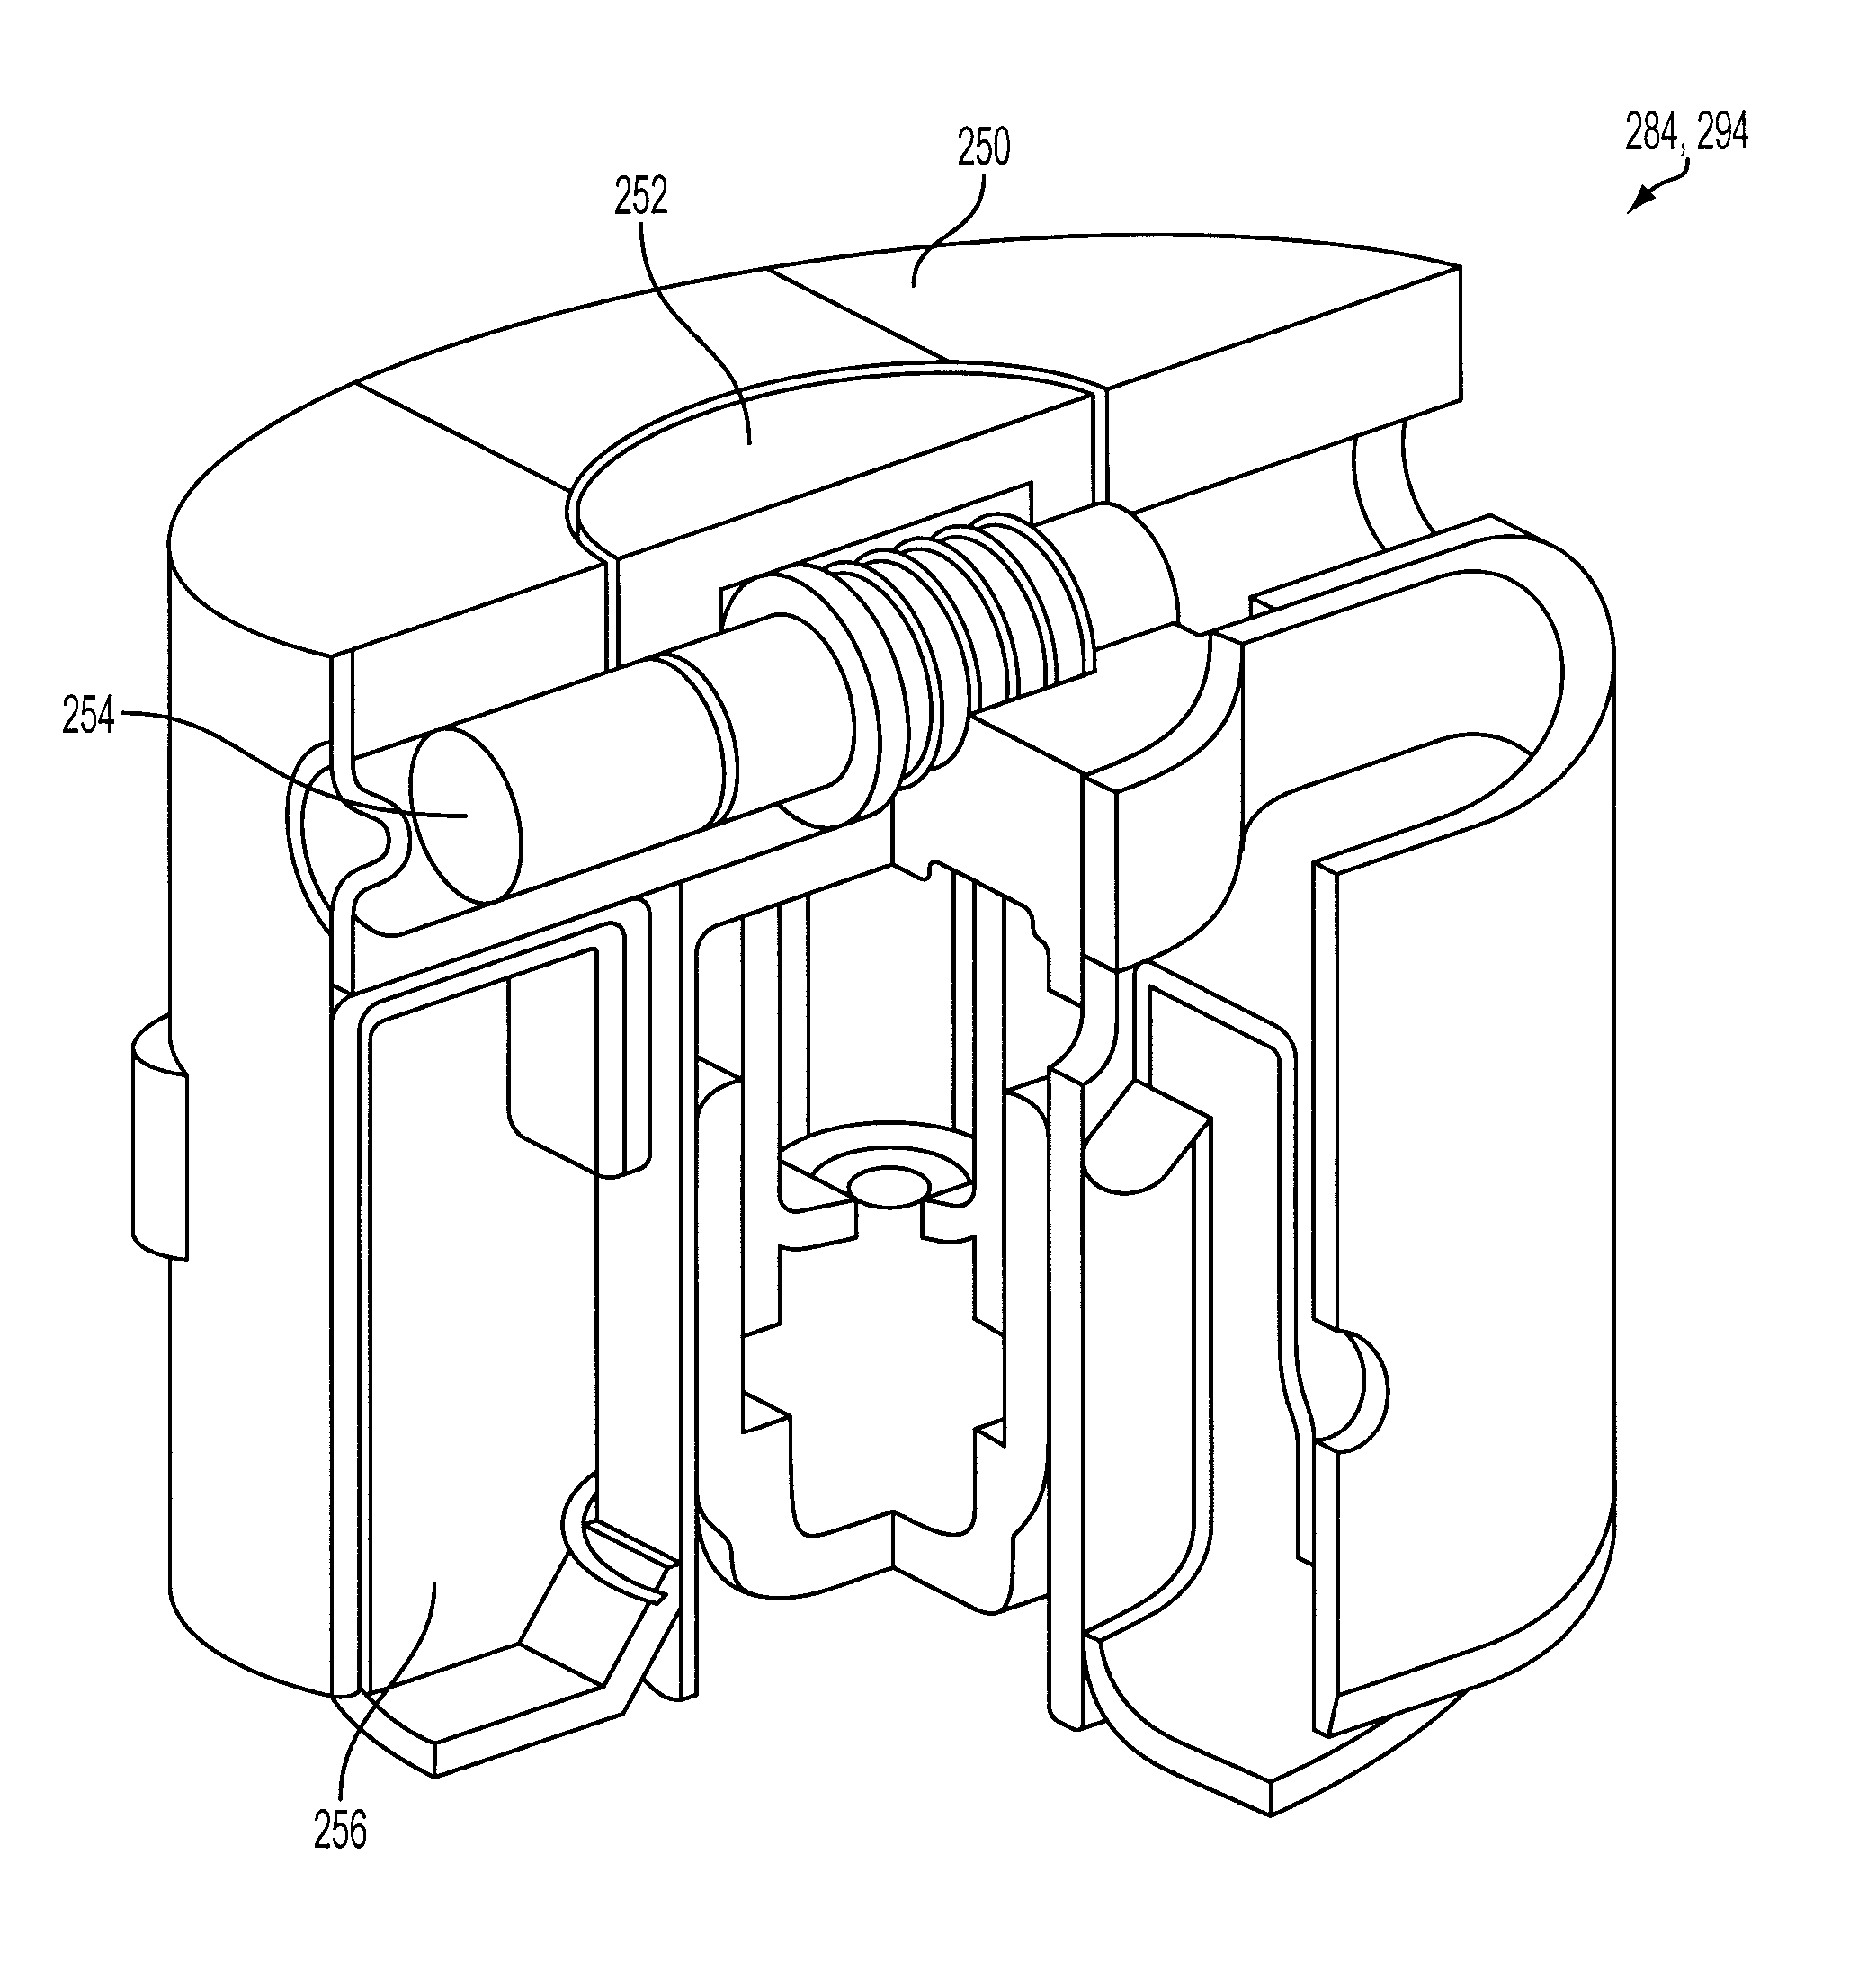 System and method for adaptive control of variable valve lift tappet switching